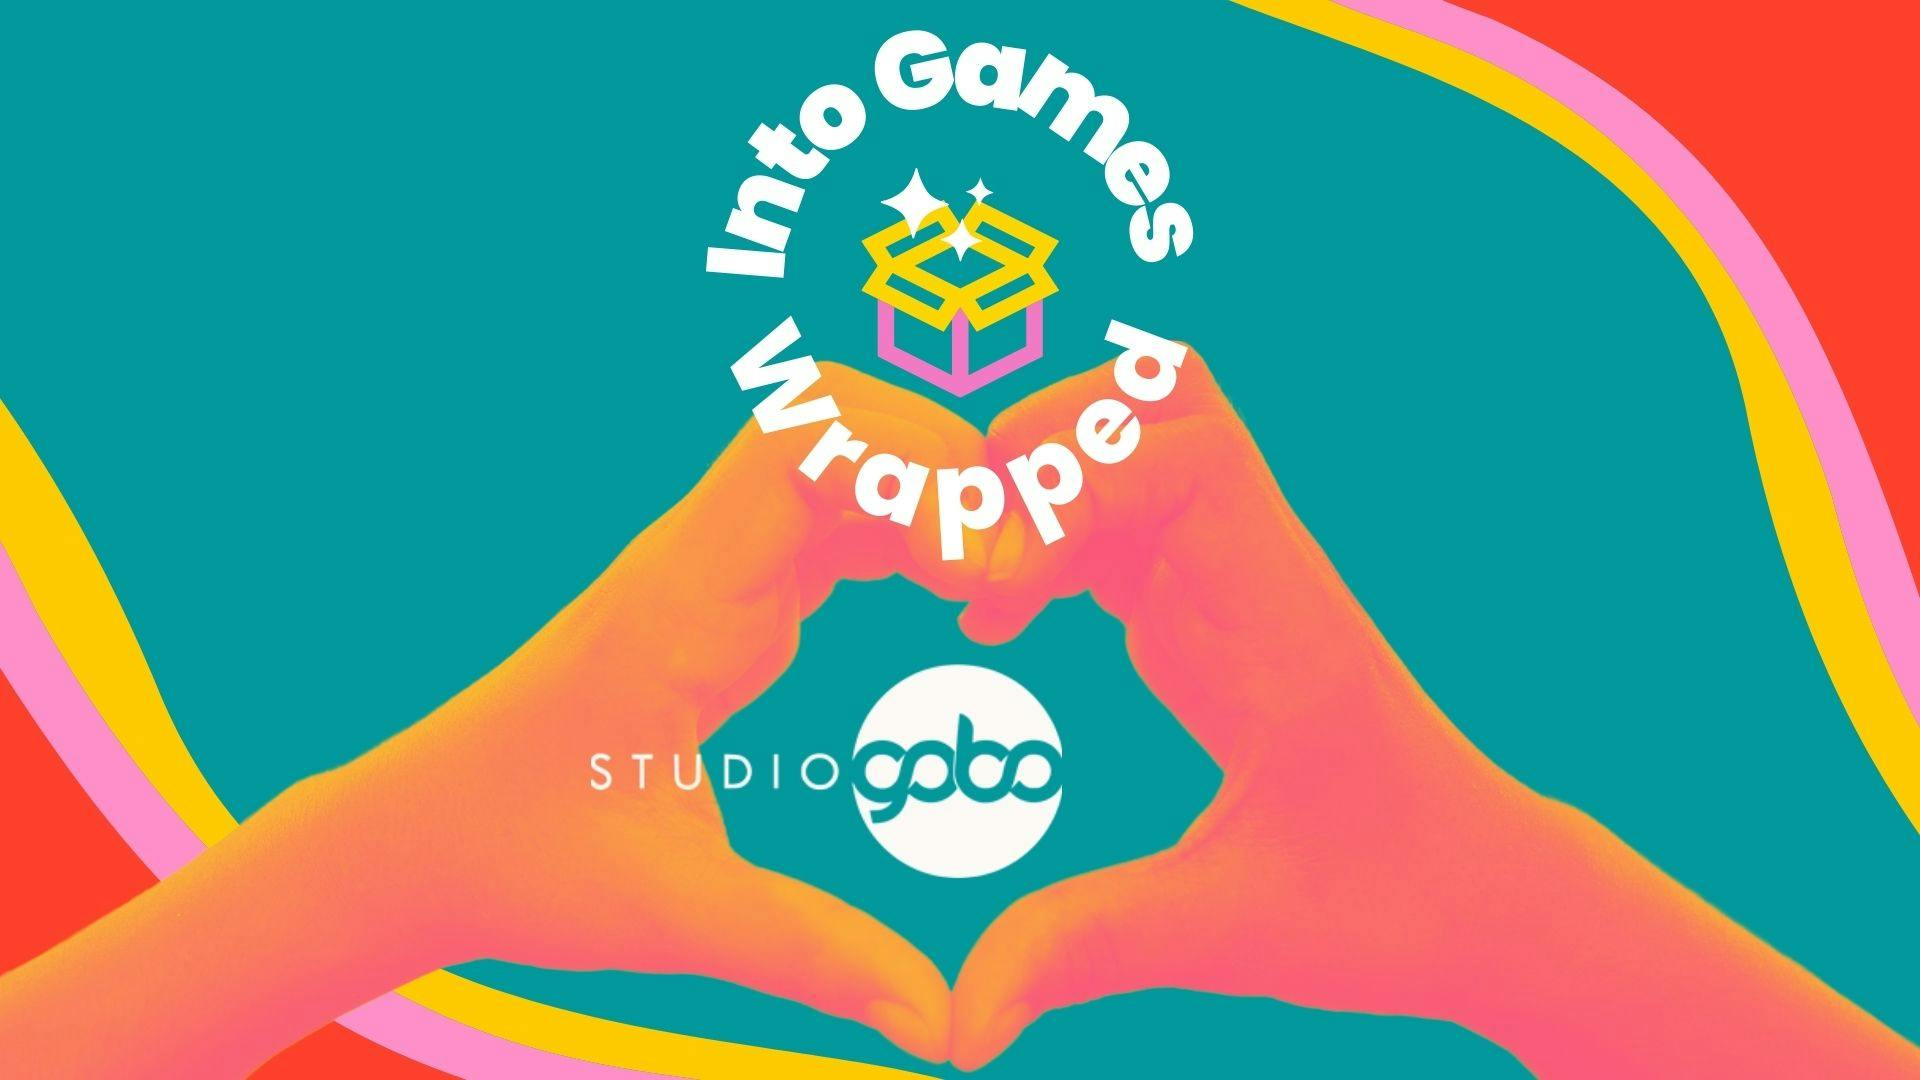 into games and studio gobo working together 